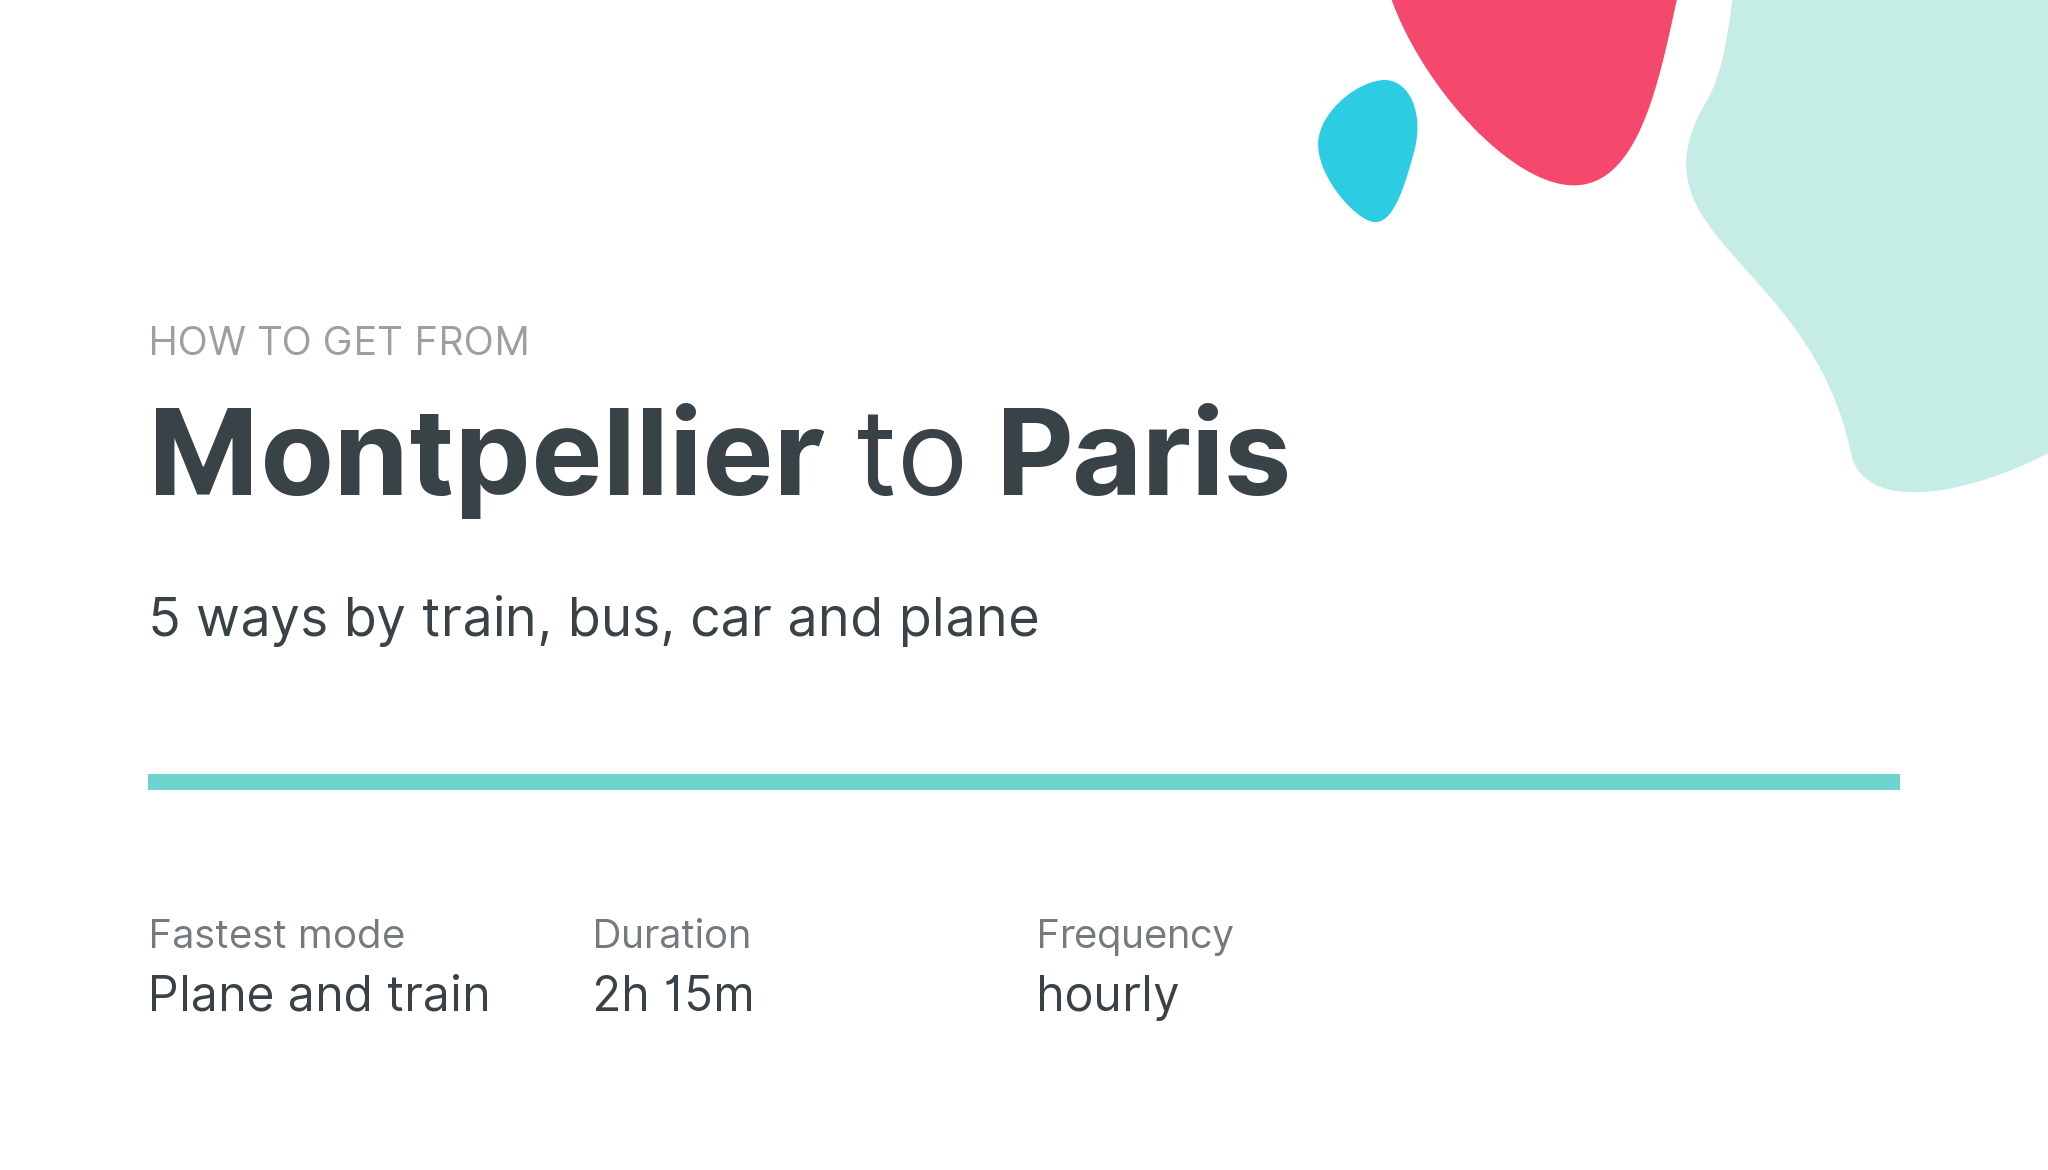 How do I get from Montpellier to Paris